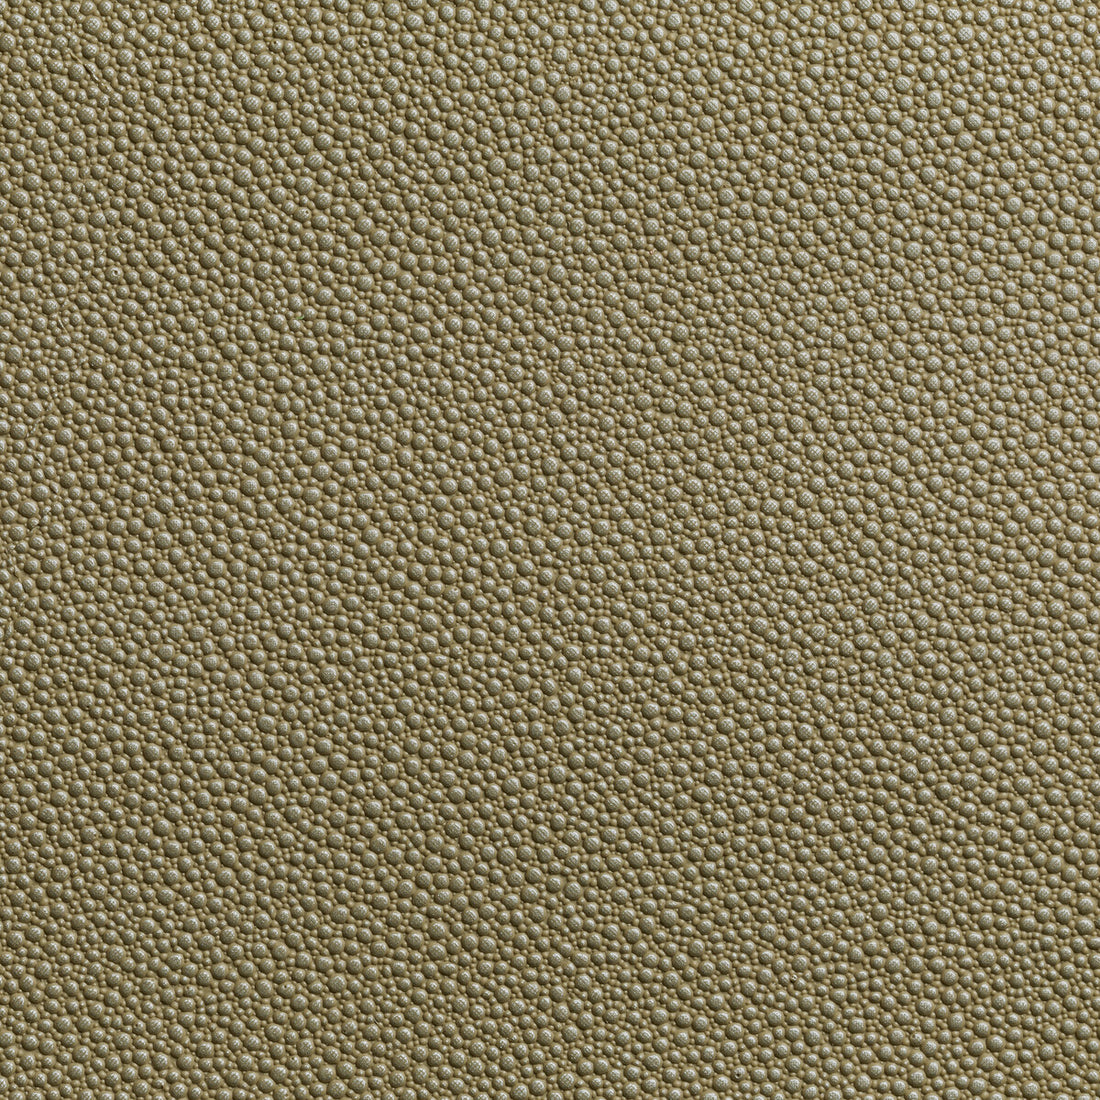 Fetch fabric in radiant color - pattern FETCH.16.0 - by Kravet Contract in the Foundations / Value collection